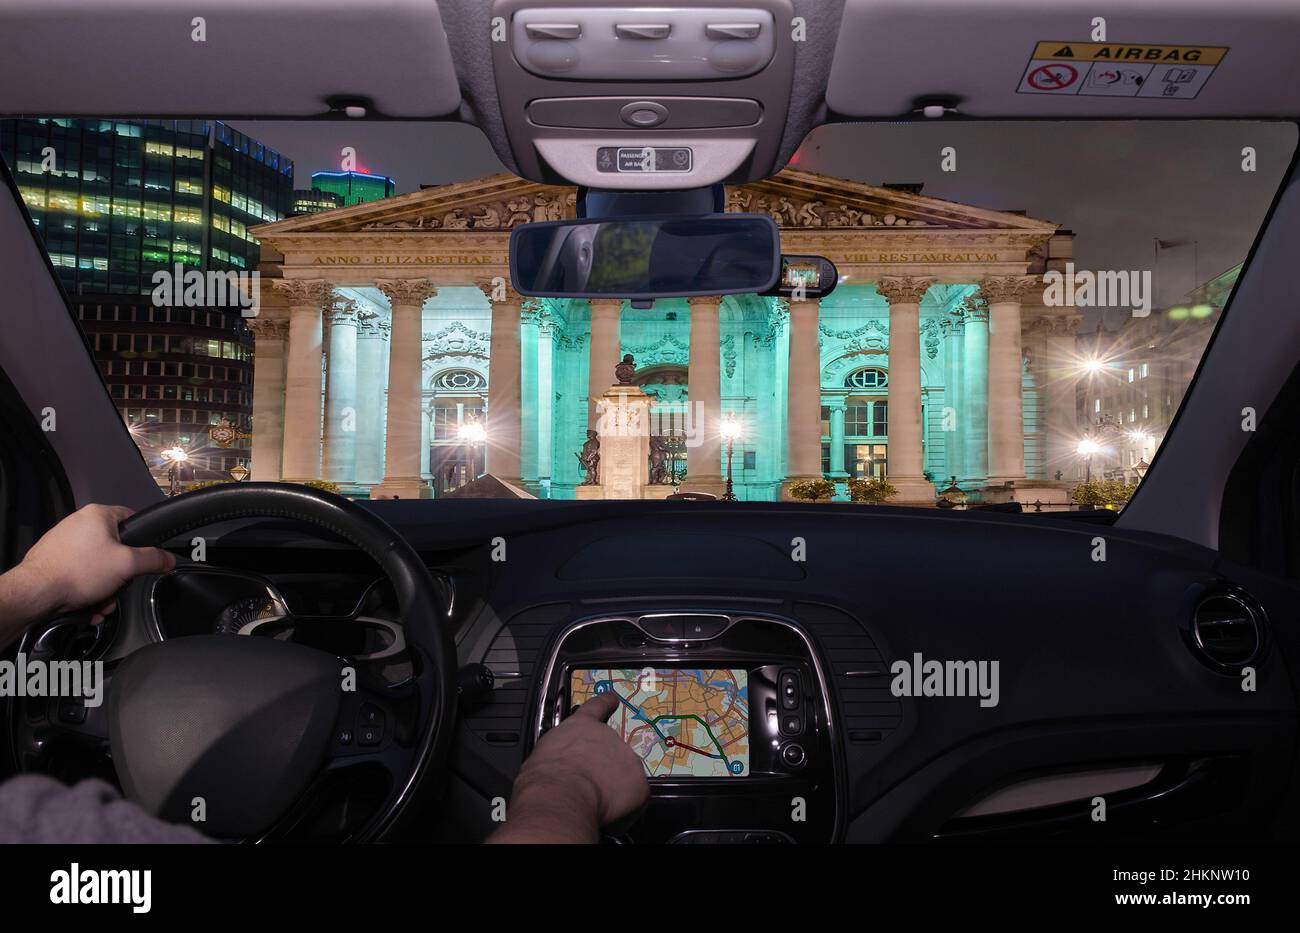 Driving a car while using the touch screen of a GPS navigation system towards the Royal Exchange Building in the financial district of London, UK Stock Photo